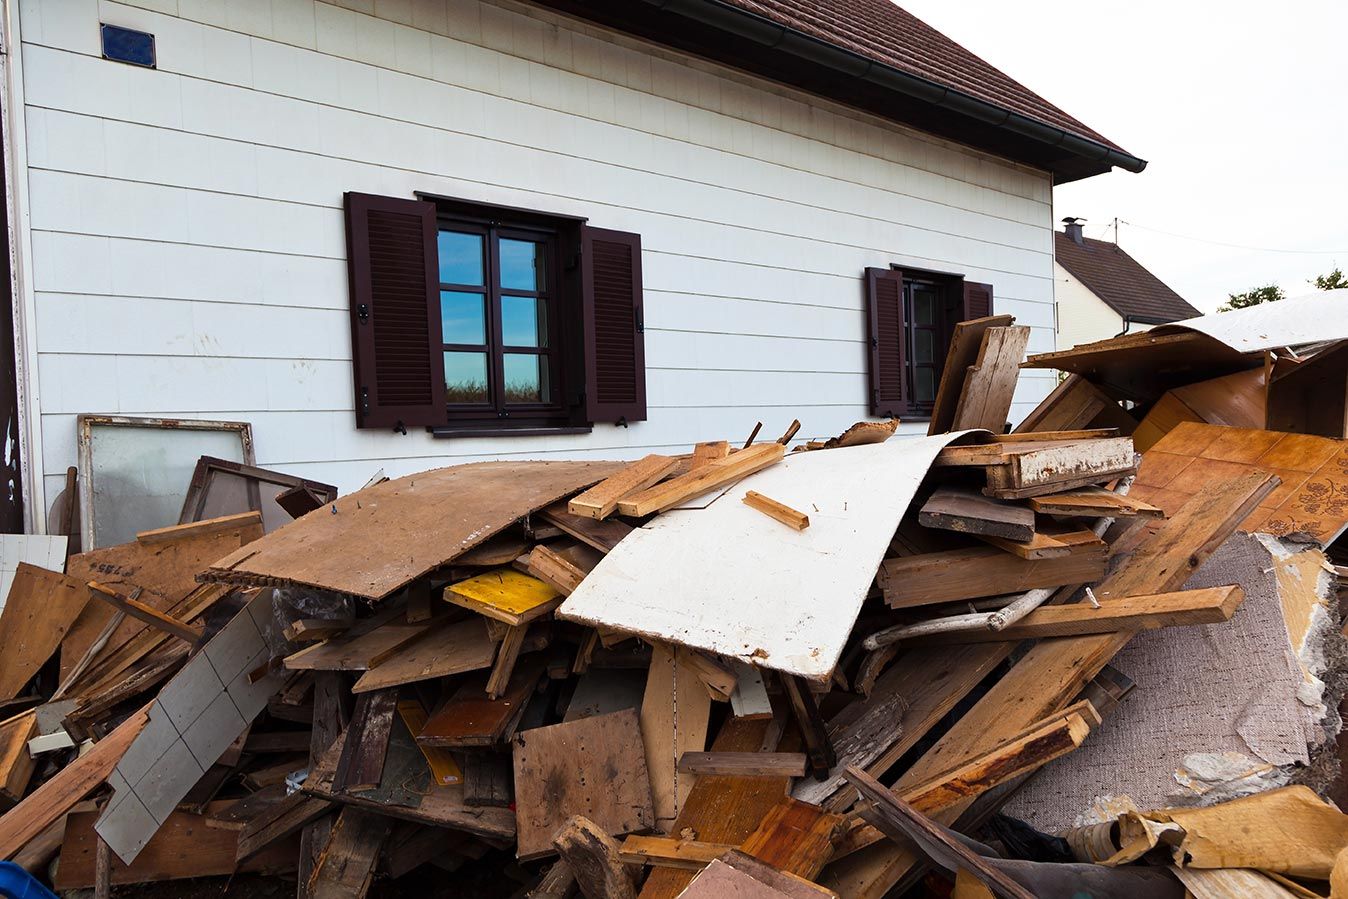 Maher Removal & Disposal offers construction debris cleanup services to residents and commercial businesses.